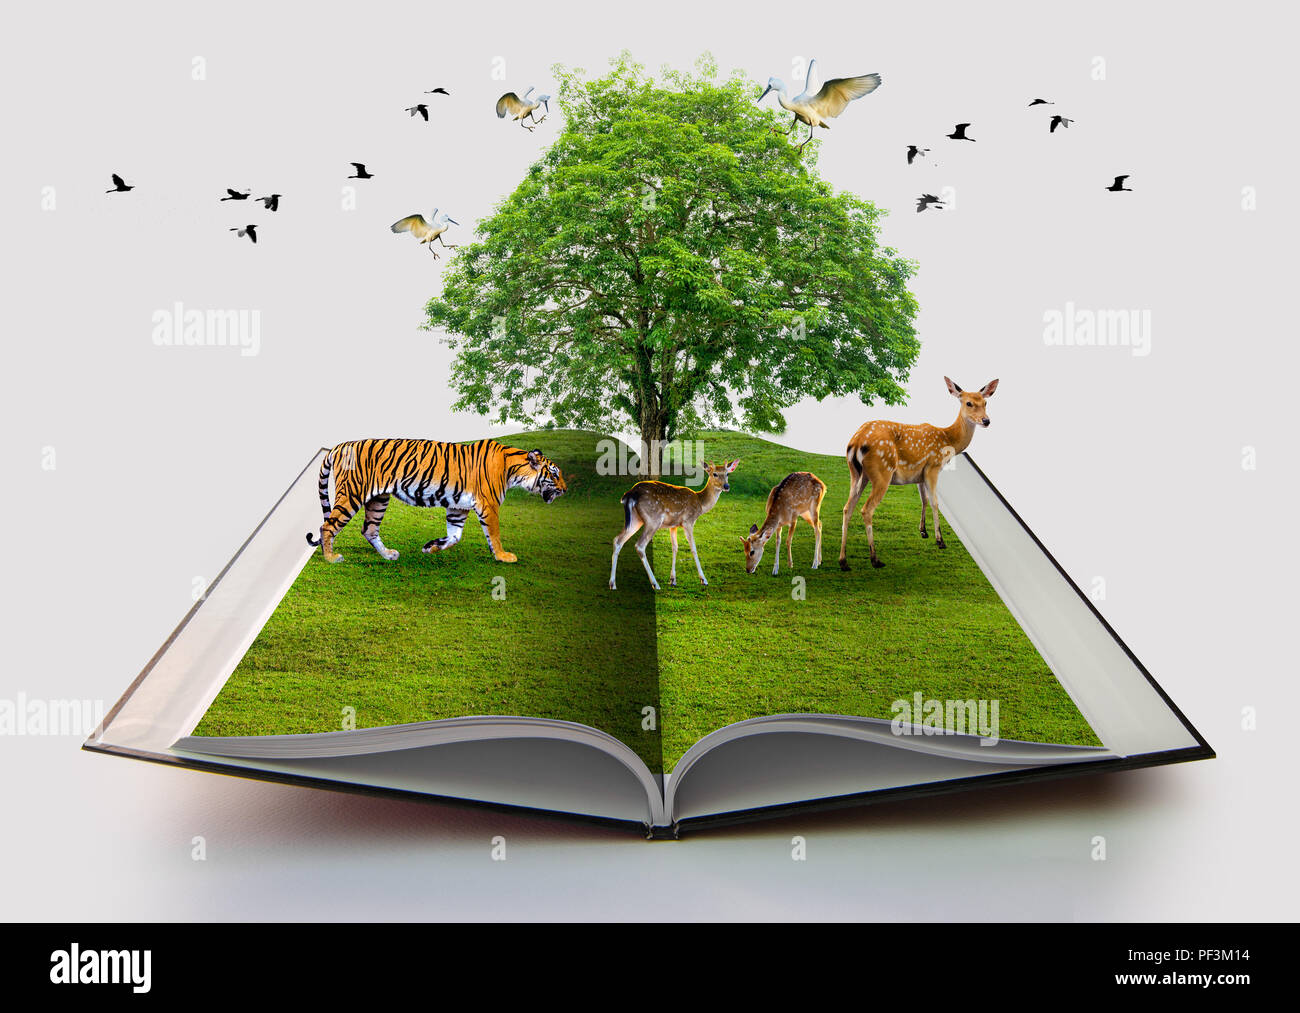 Wildlife Conservation tiger Deer Bird environment book of nature isolated on white open book in paper recycling 3d rendering book of nature with grass Stock Photo